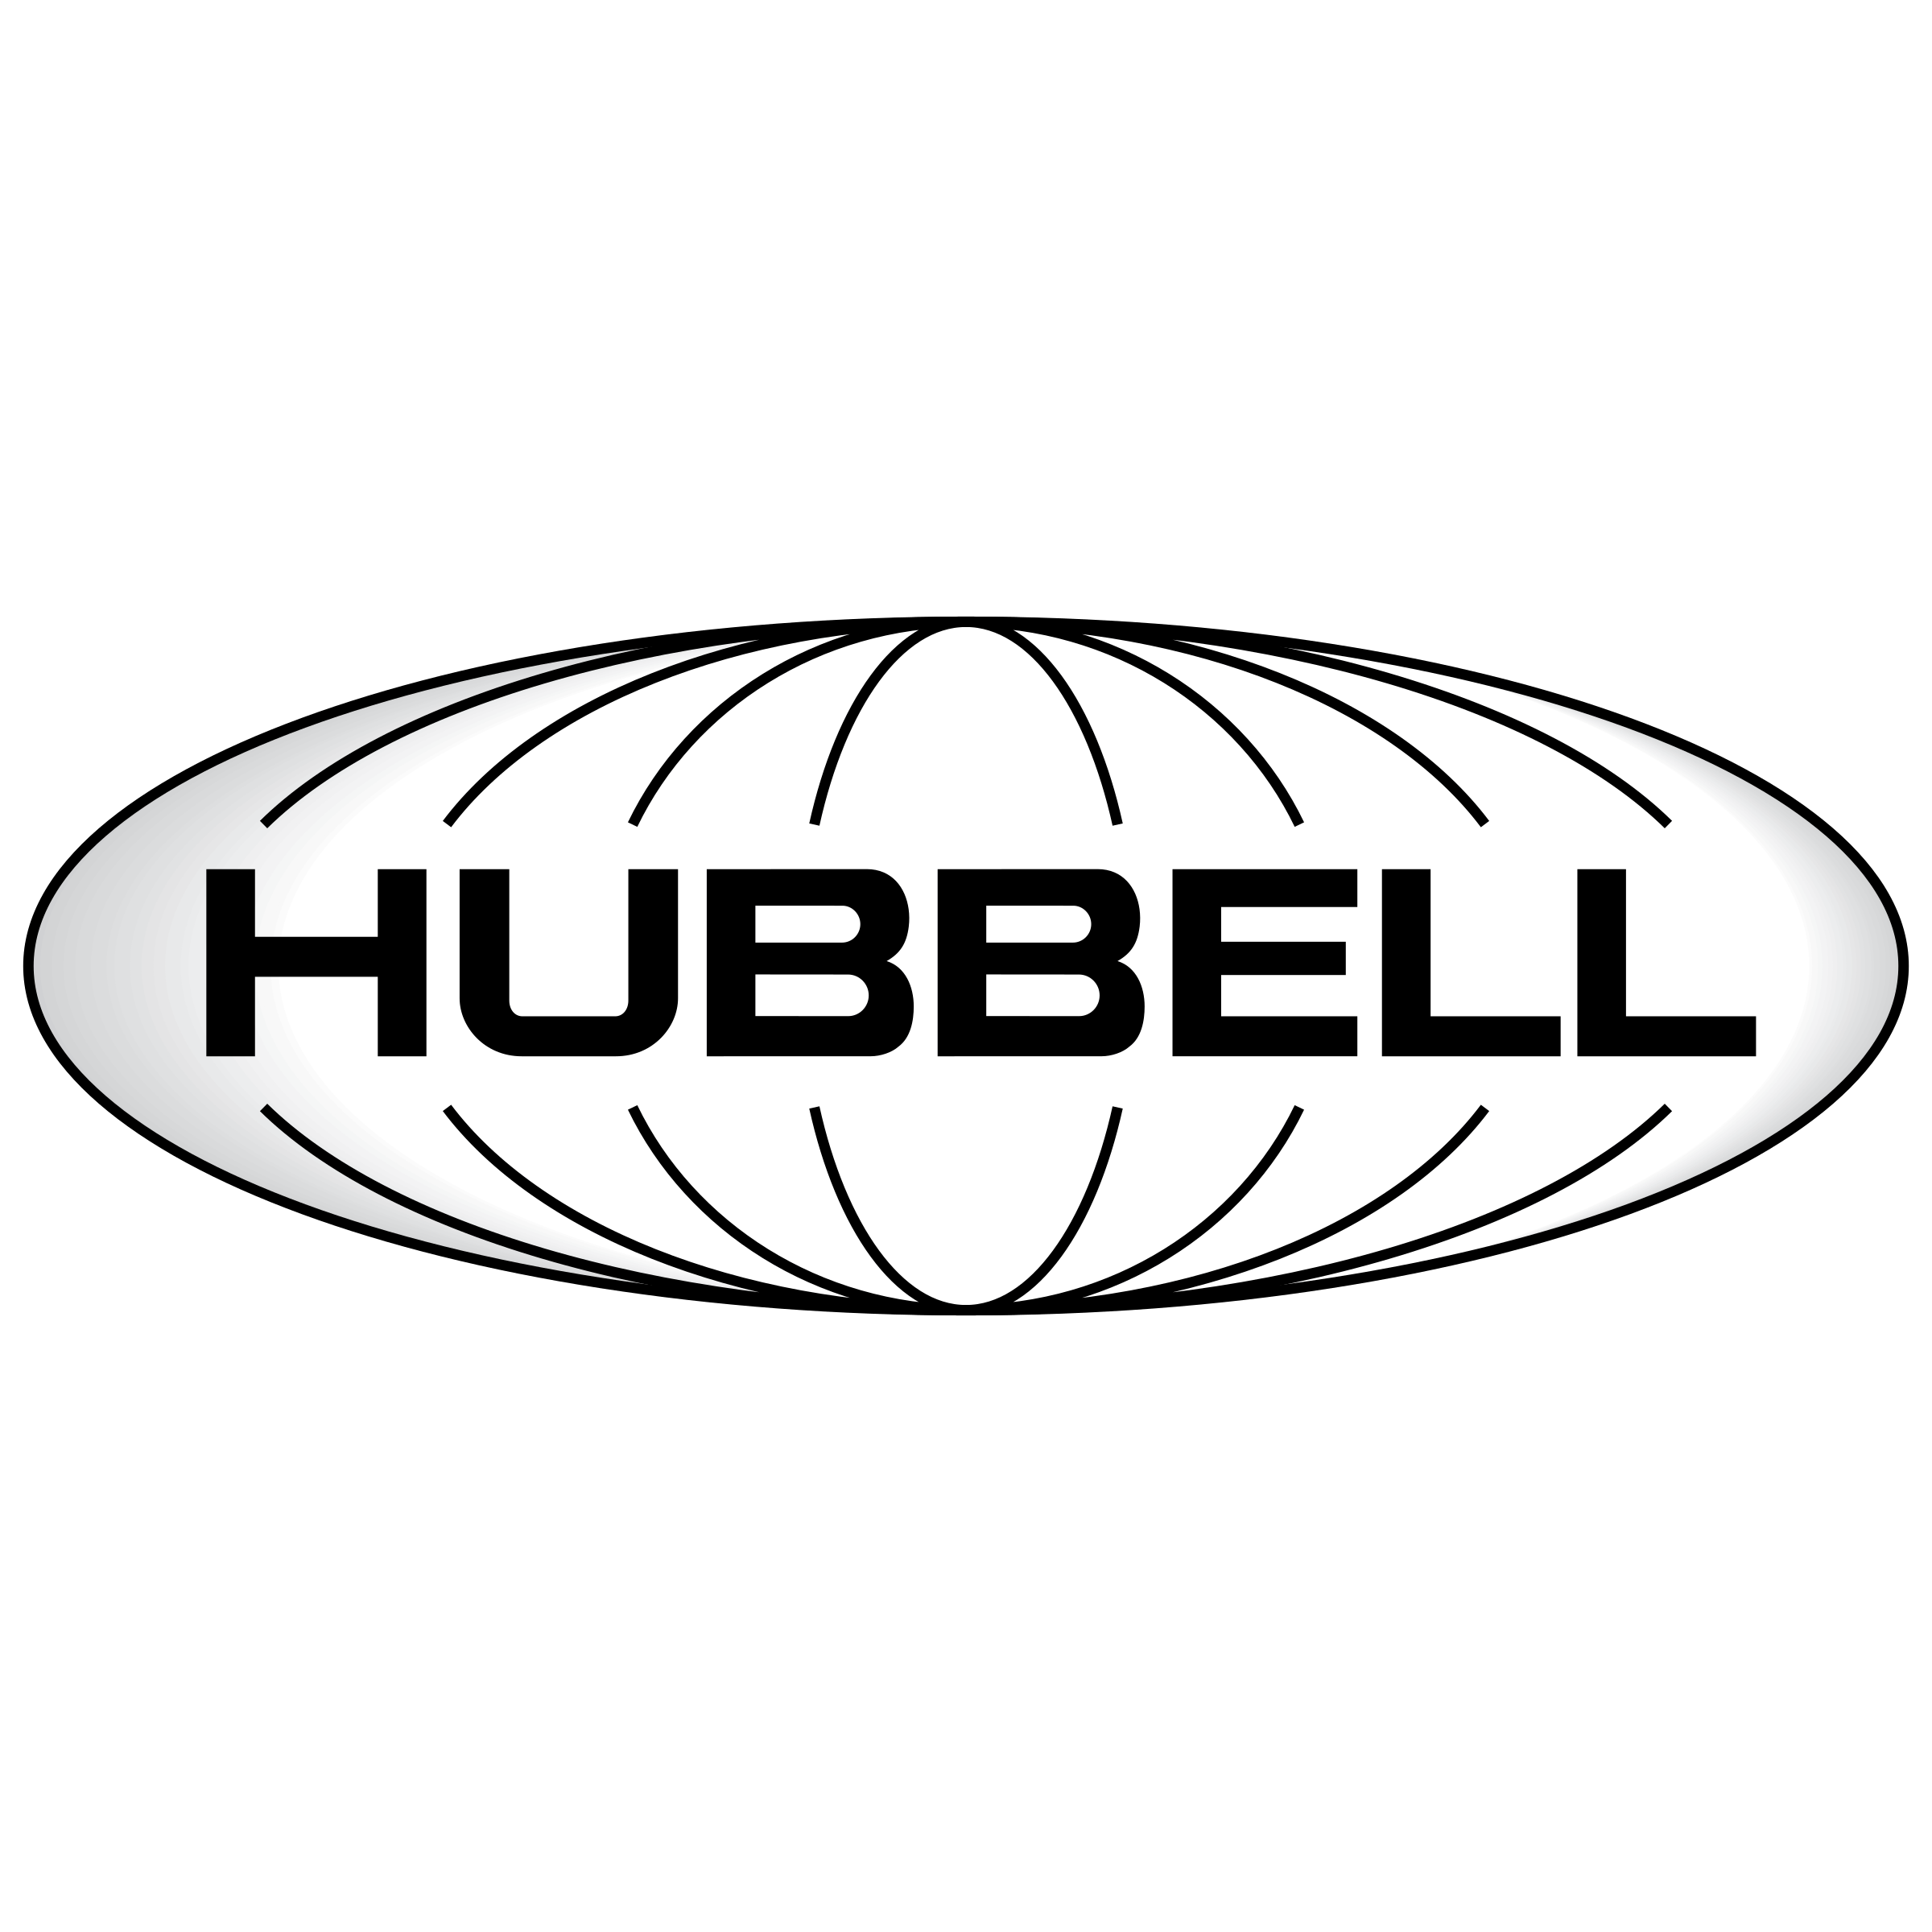 Hubbell Logo - Hubbell Logo PNG Transparent & SVG Vector - Freebie Supply